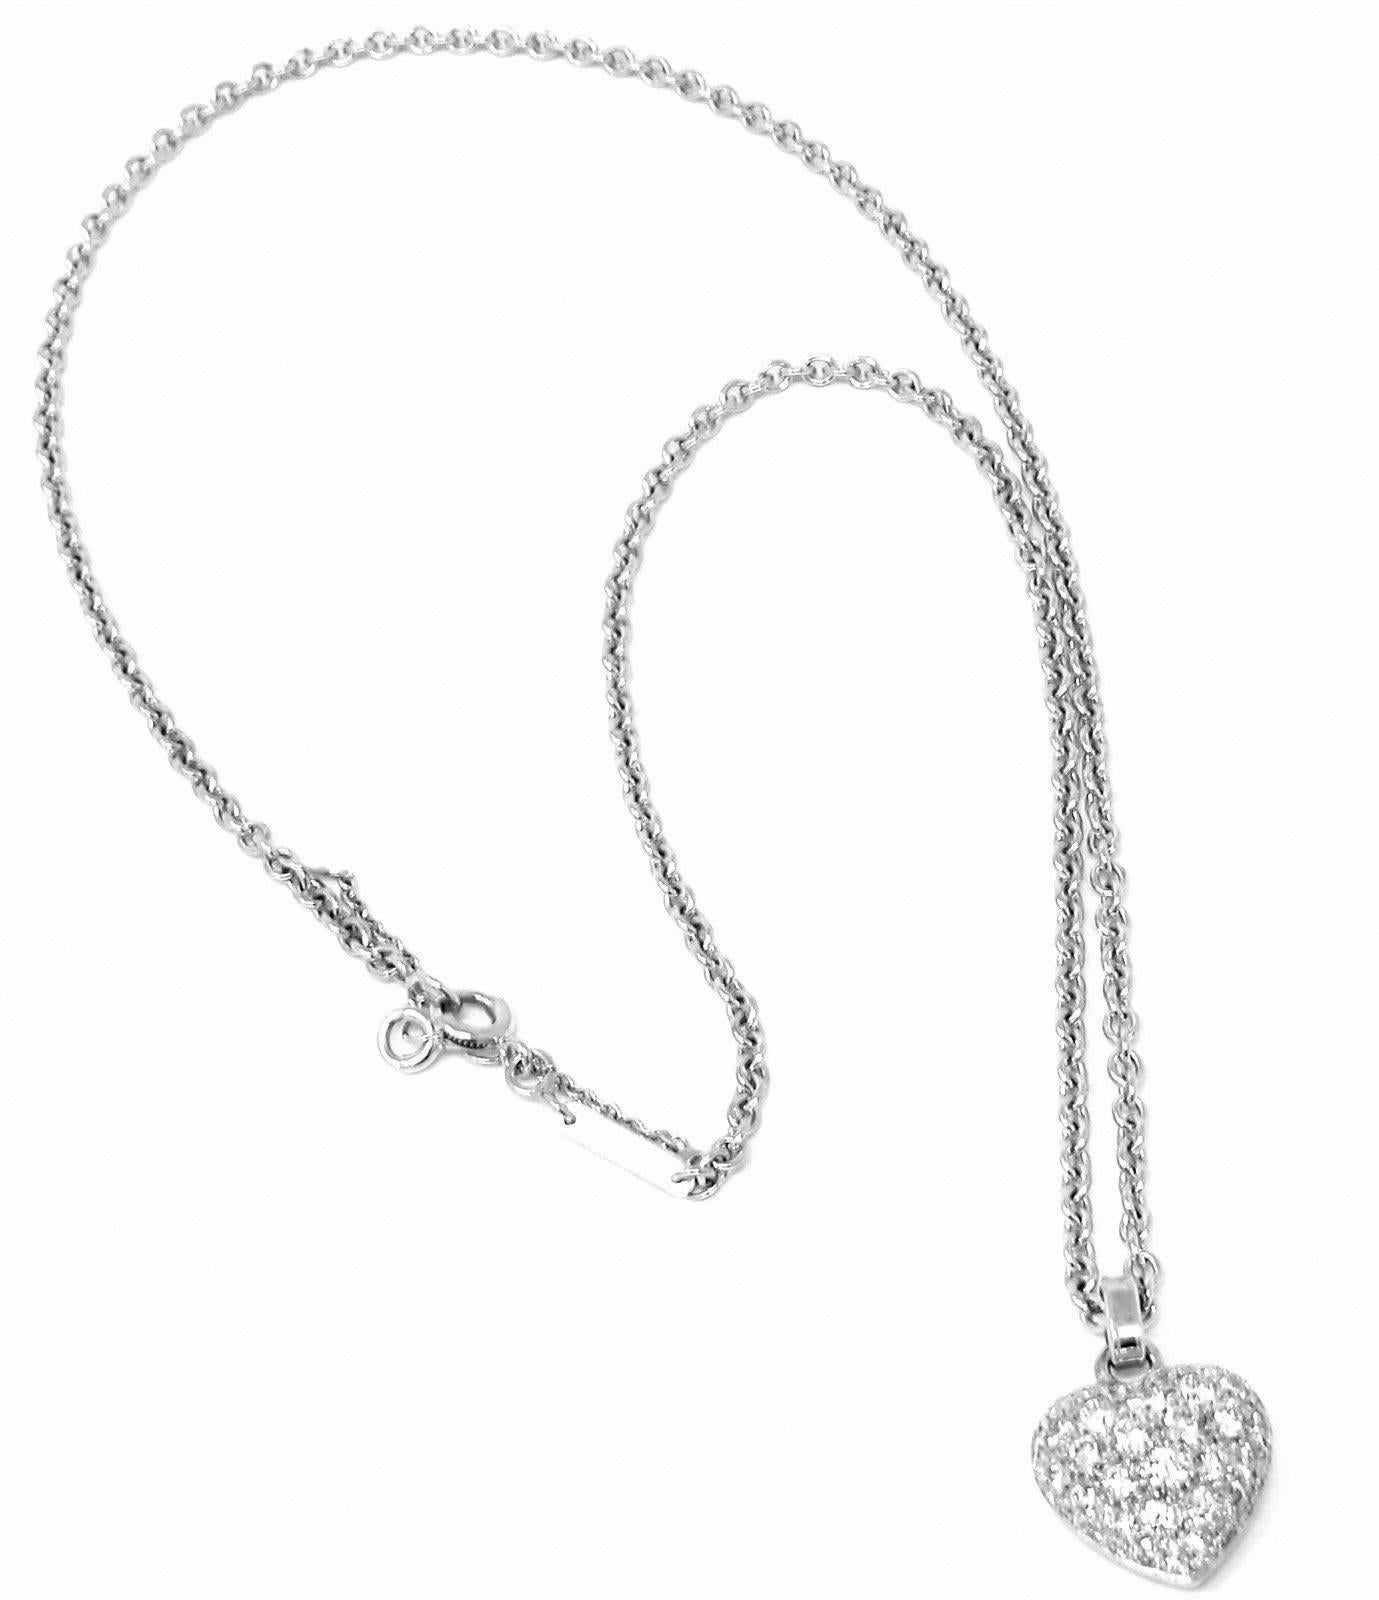 18k White Gold Diamond Pave Heart Pendant Necklace by Cartier.
With Round brilliant cut diamonds total weight approx 1.30ct. 
Diamonds VVS1 clarity, E color
This necklace is in mint condition and comes with original Cartier box.
Details:
Pendant: